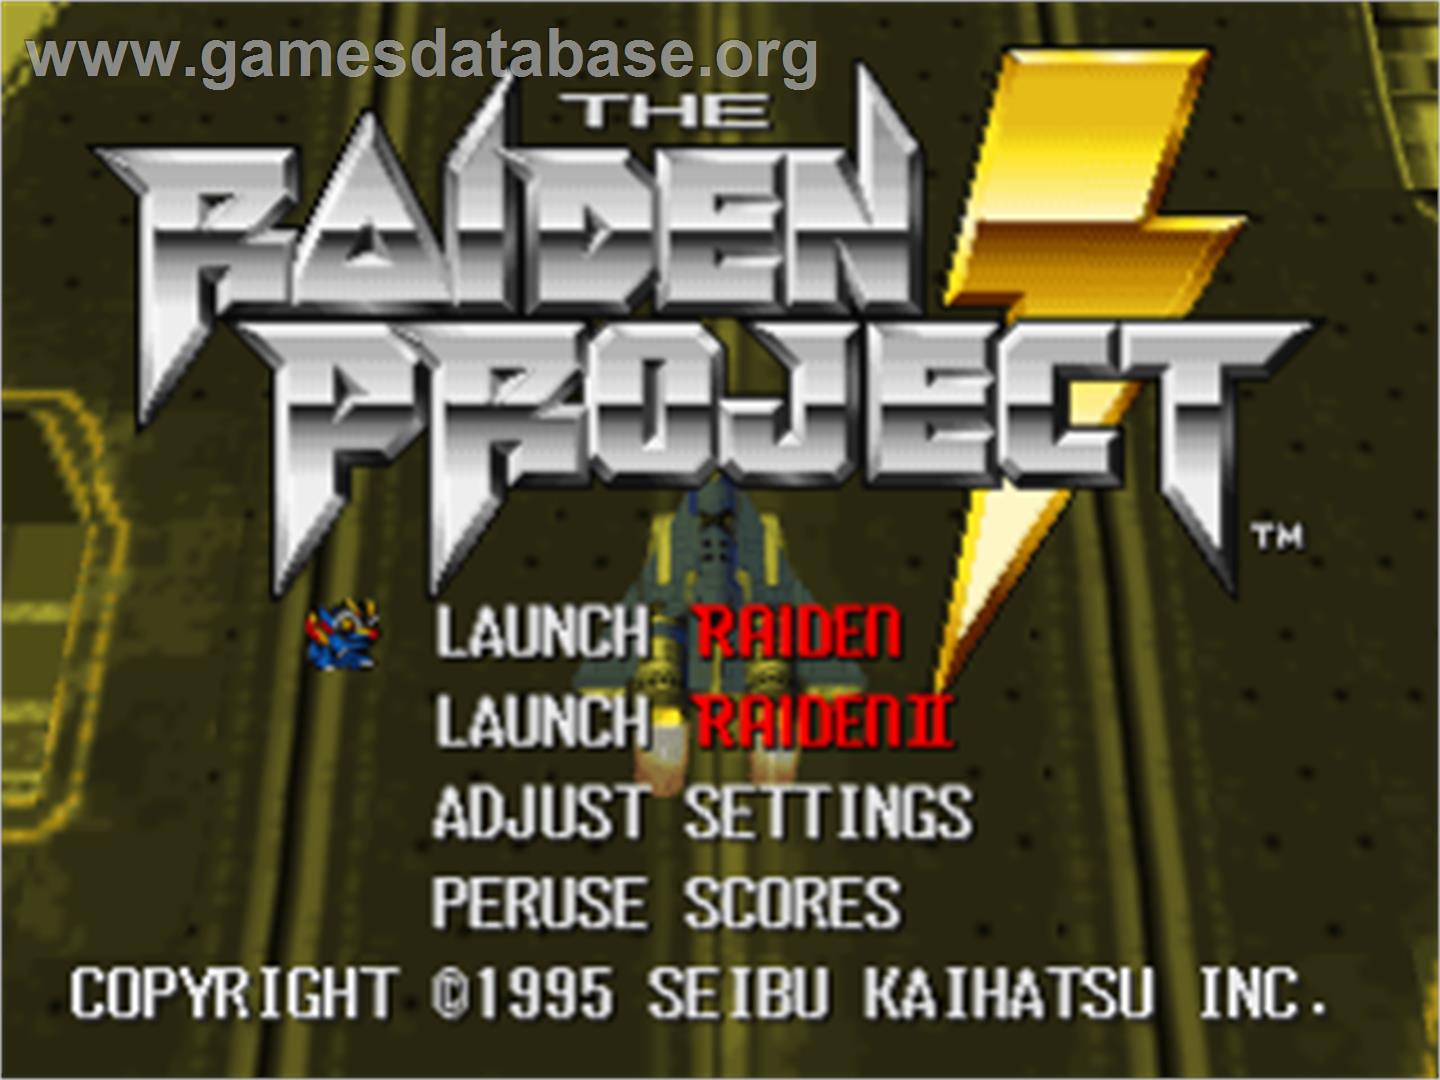 The Raiden Project - Sony Playstation - Artwork - Title Screen